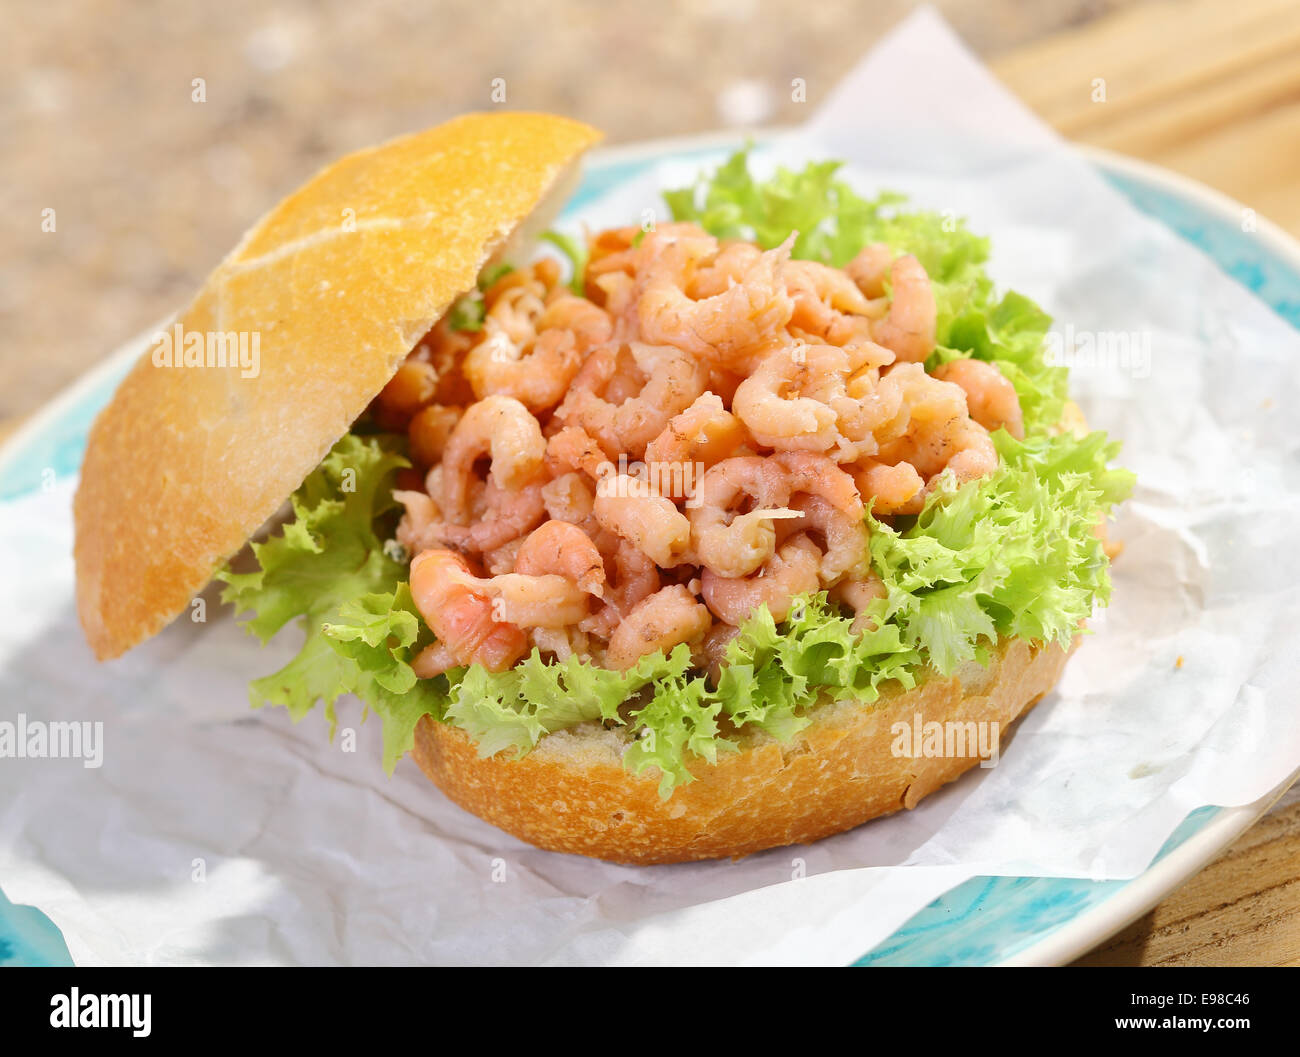 Delicious fresh crisp crusty roll with frilly lettuce topped with shrimp filling served on a napkin on a plate for a gourmet seafood lunch Stock Photo